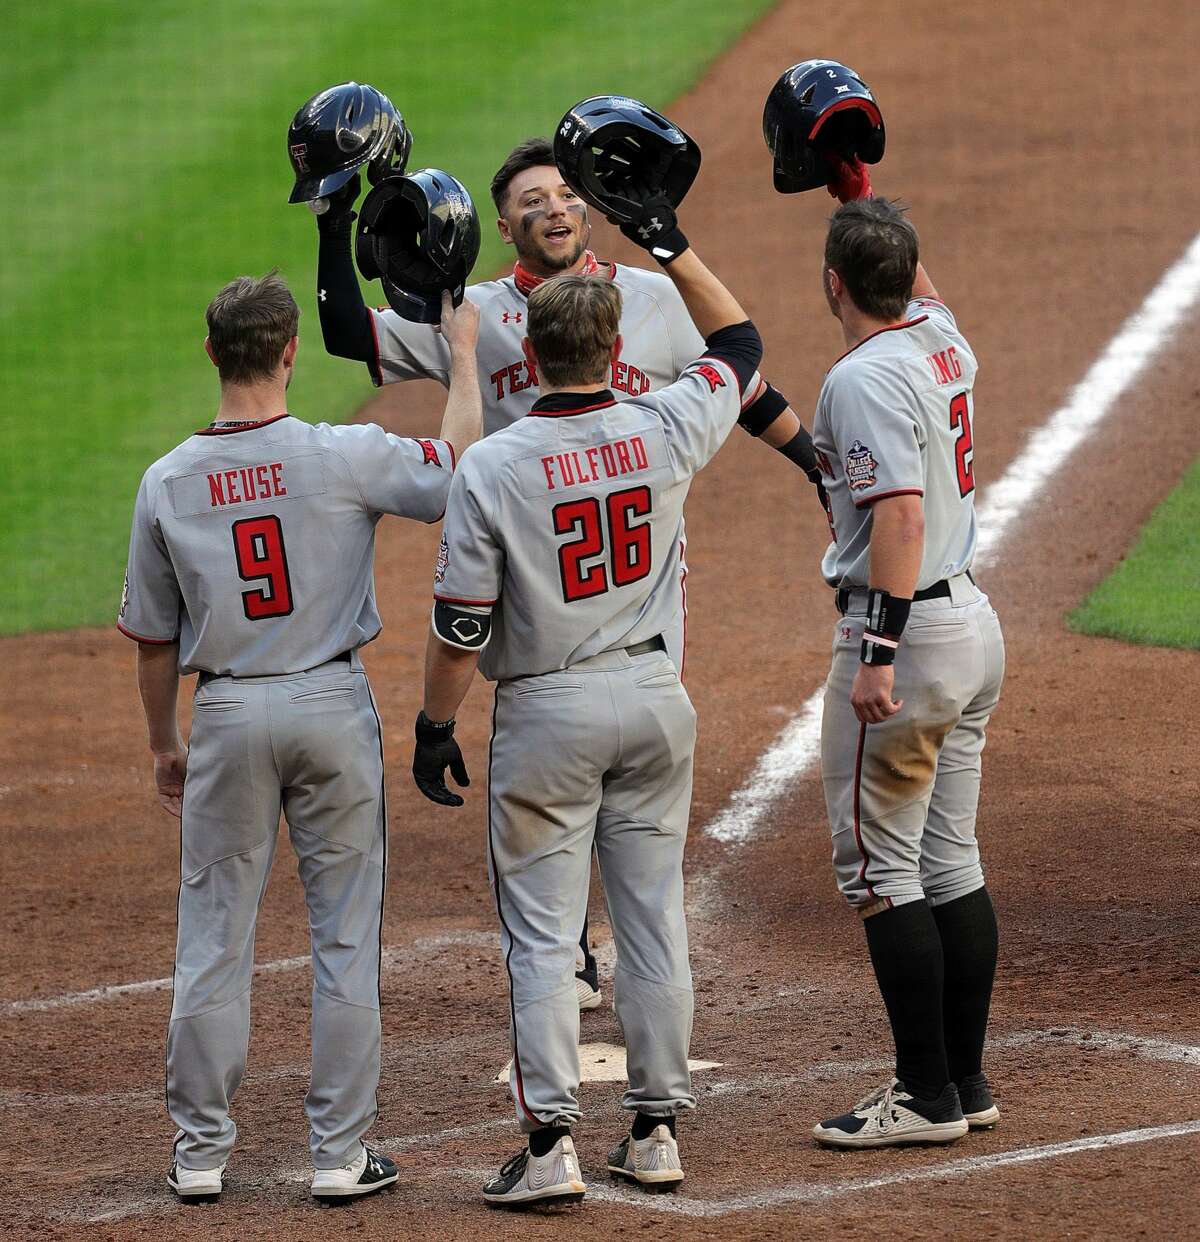 HOUSTON, TEXAS - MARCH 06: Cal Conley #13 of the Texas Tech Red Raiders is congratulated by Dylan Neuse #9, Braxton Fulford #26 and Jace Jung #2 after hitting a home run in the seventh inning against the Sam Houston State Bearkats at Minute Maid Park on March 06, 2021 in Houston, Texas. (Photo by Bob Levey/Getty Images)